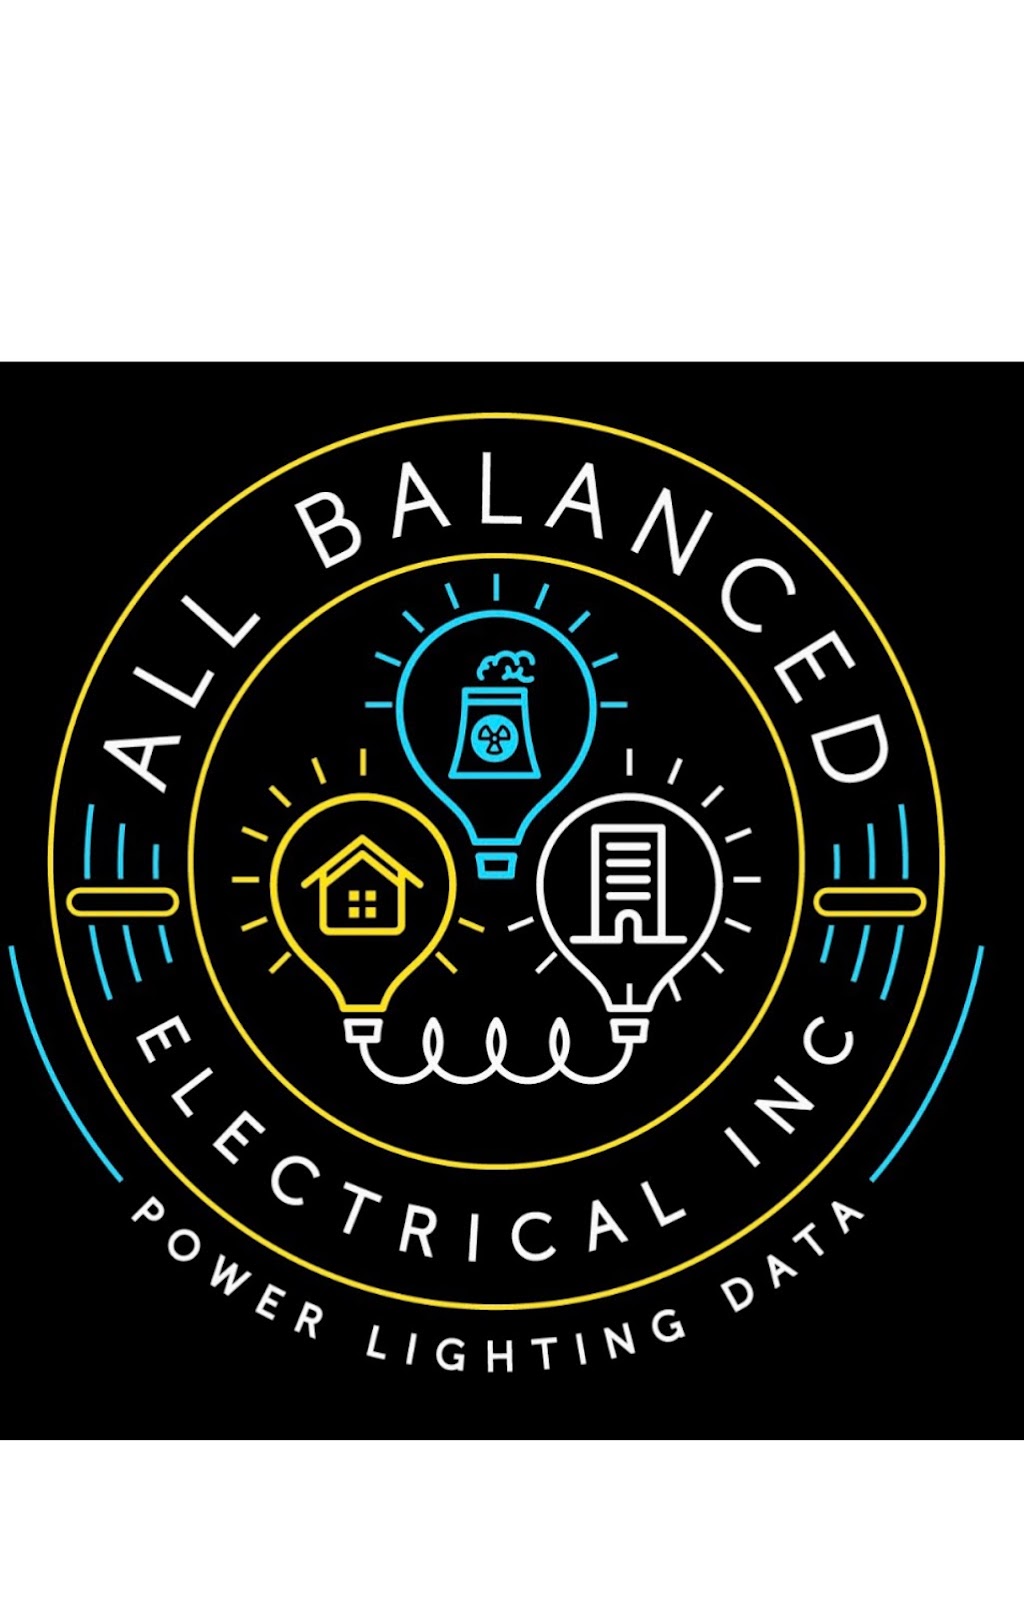 All Balanced Electrical Inc | 516 Industrial Loop W 2nd floor suite 201, Staten Island, NY 10309 | Phone: (718) 986-4586